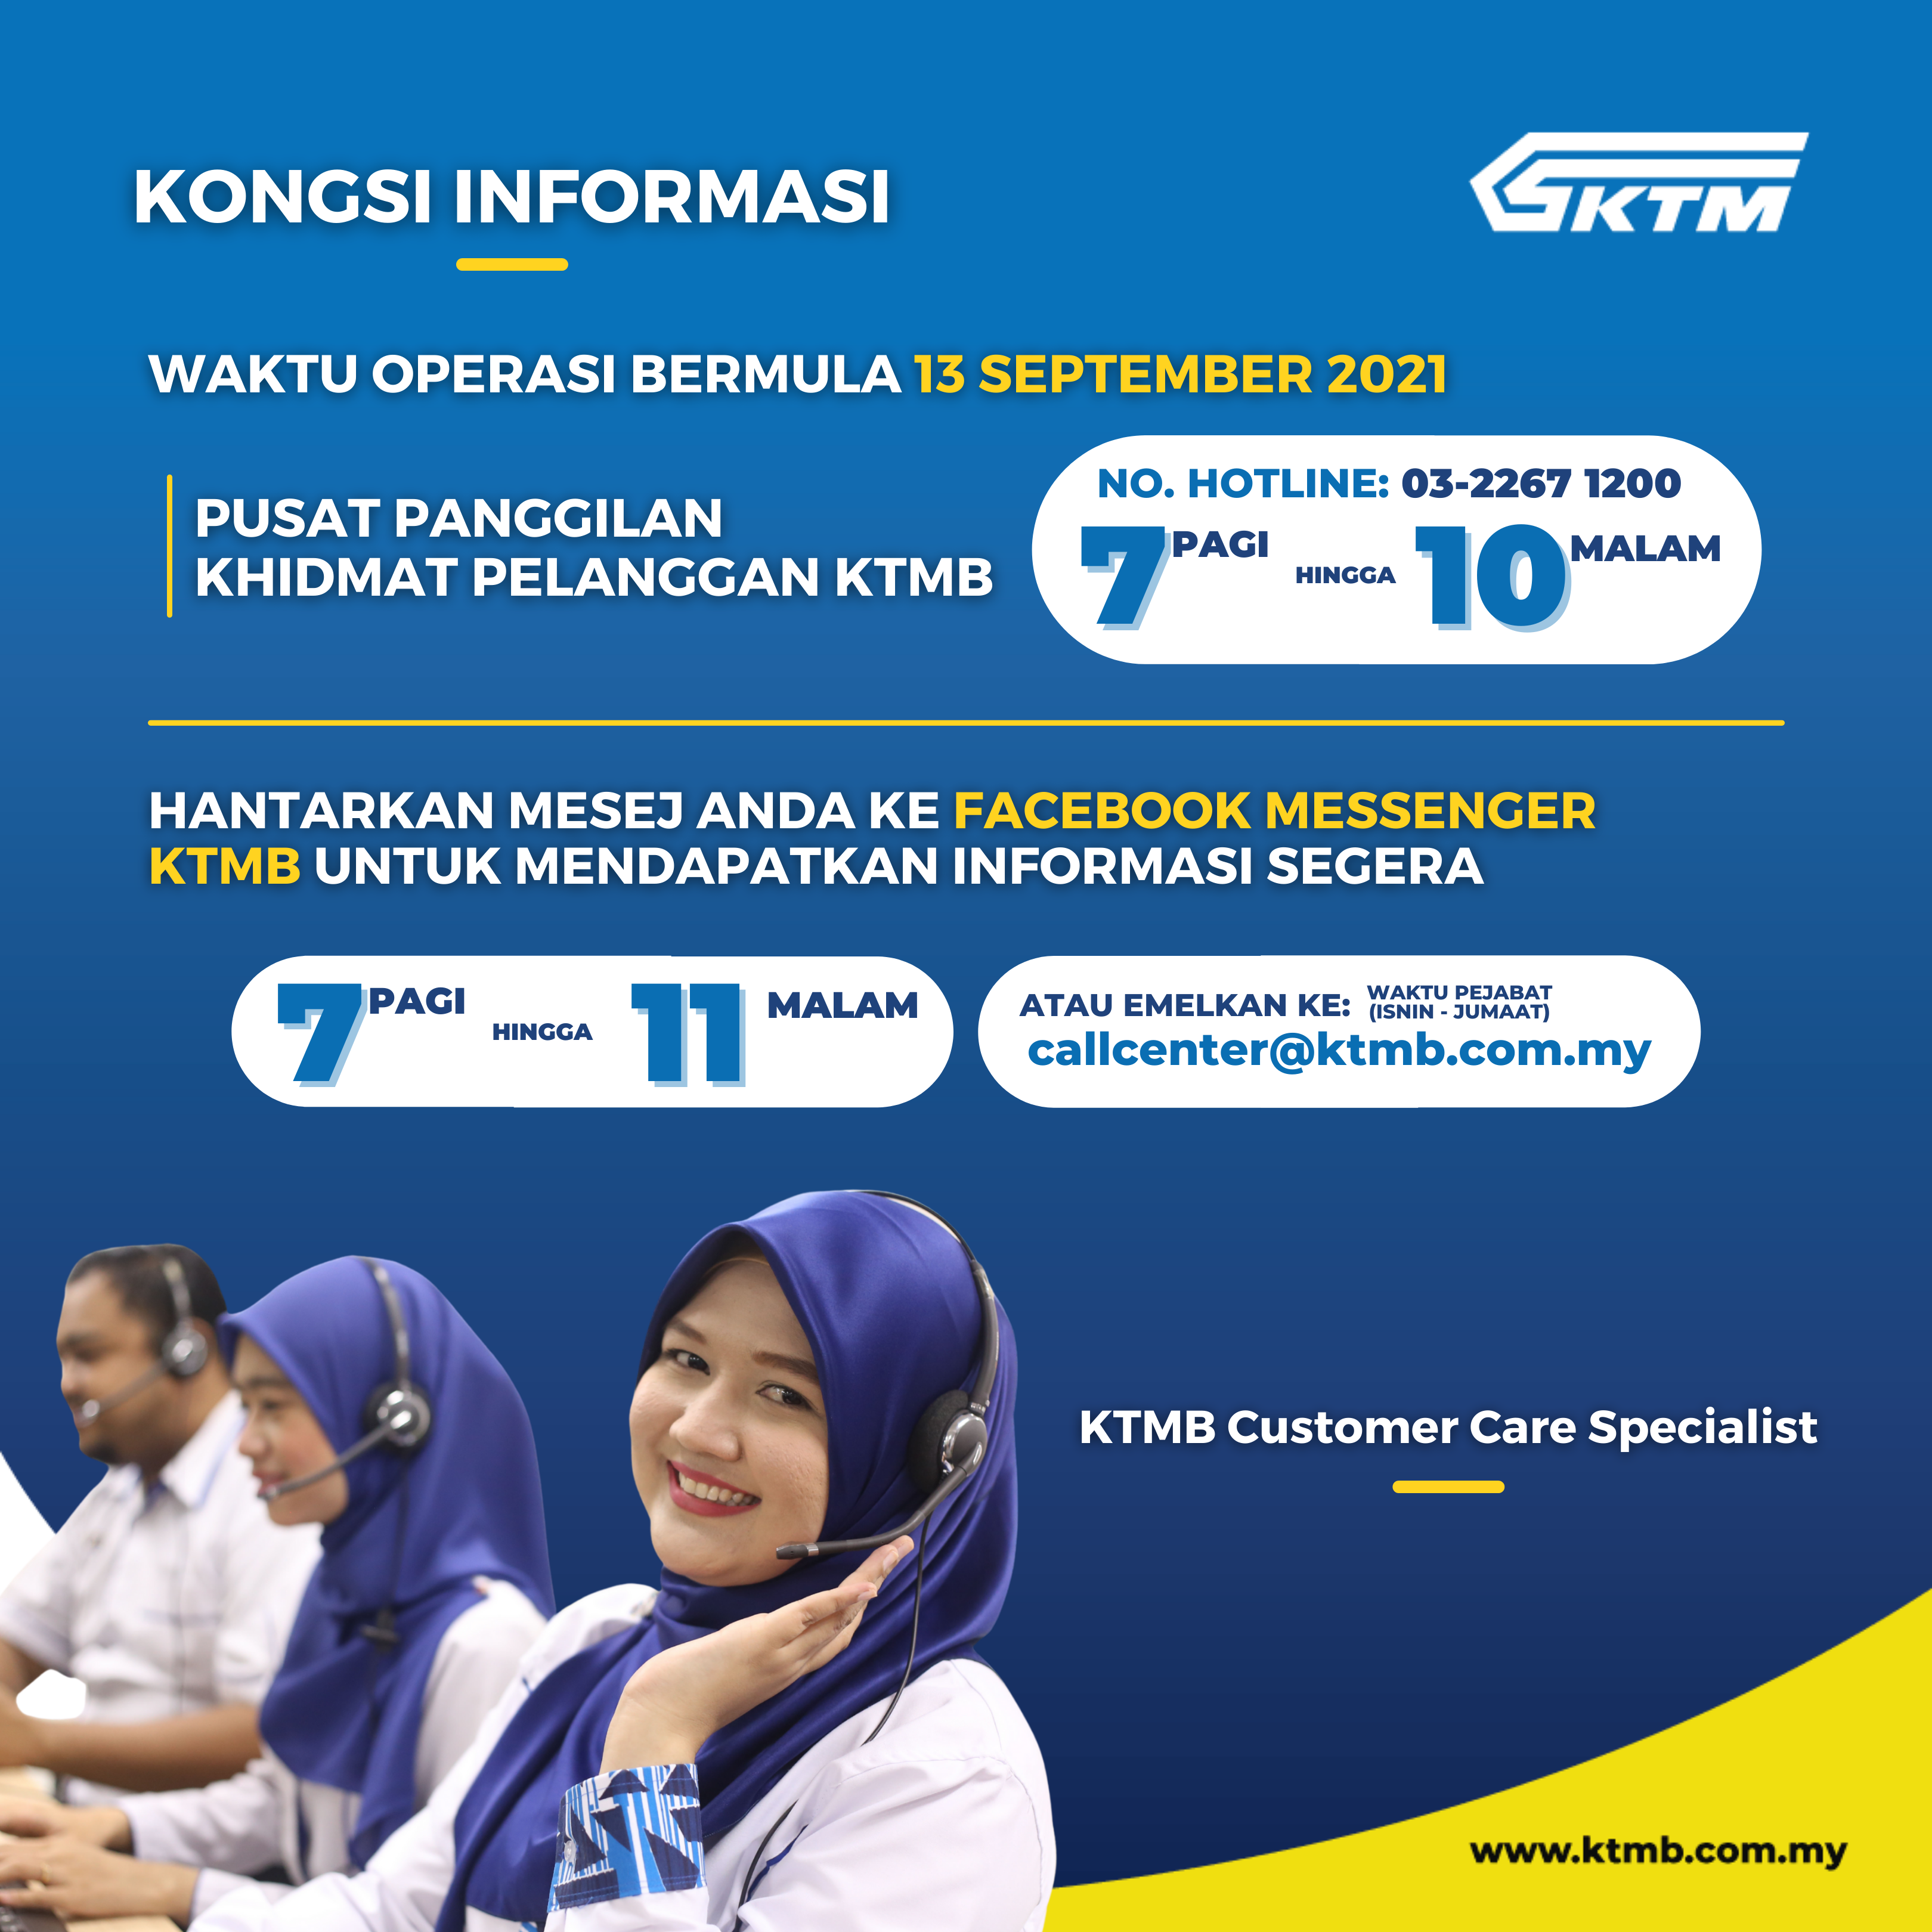 MCO - KTMB Call Center Operation Time - 7:00am to 10:00pm (Daily)